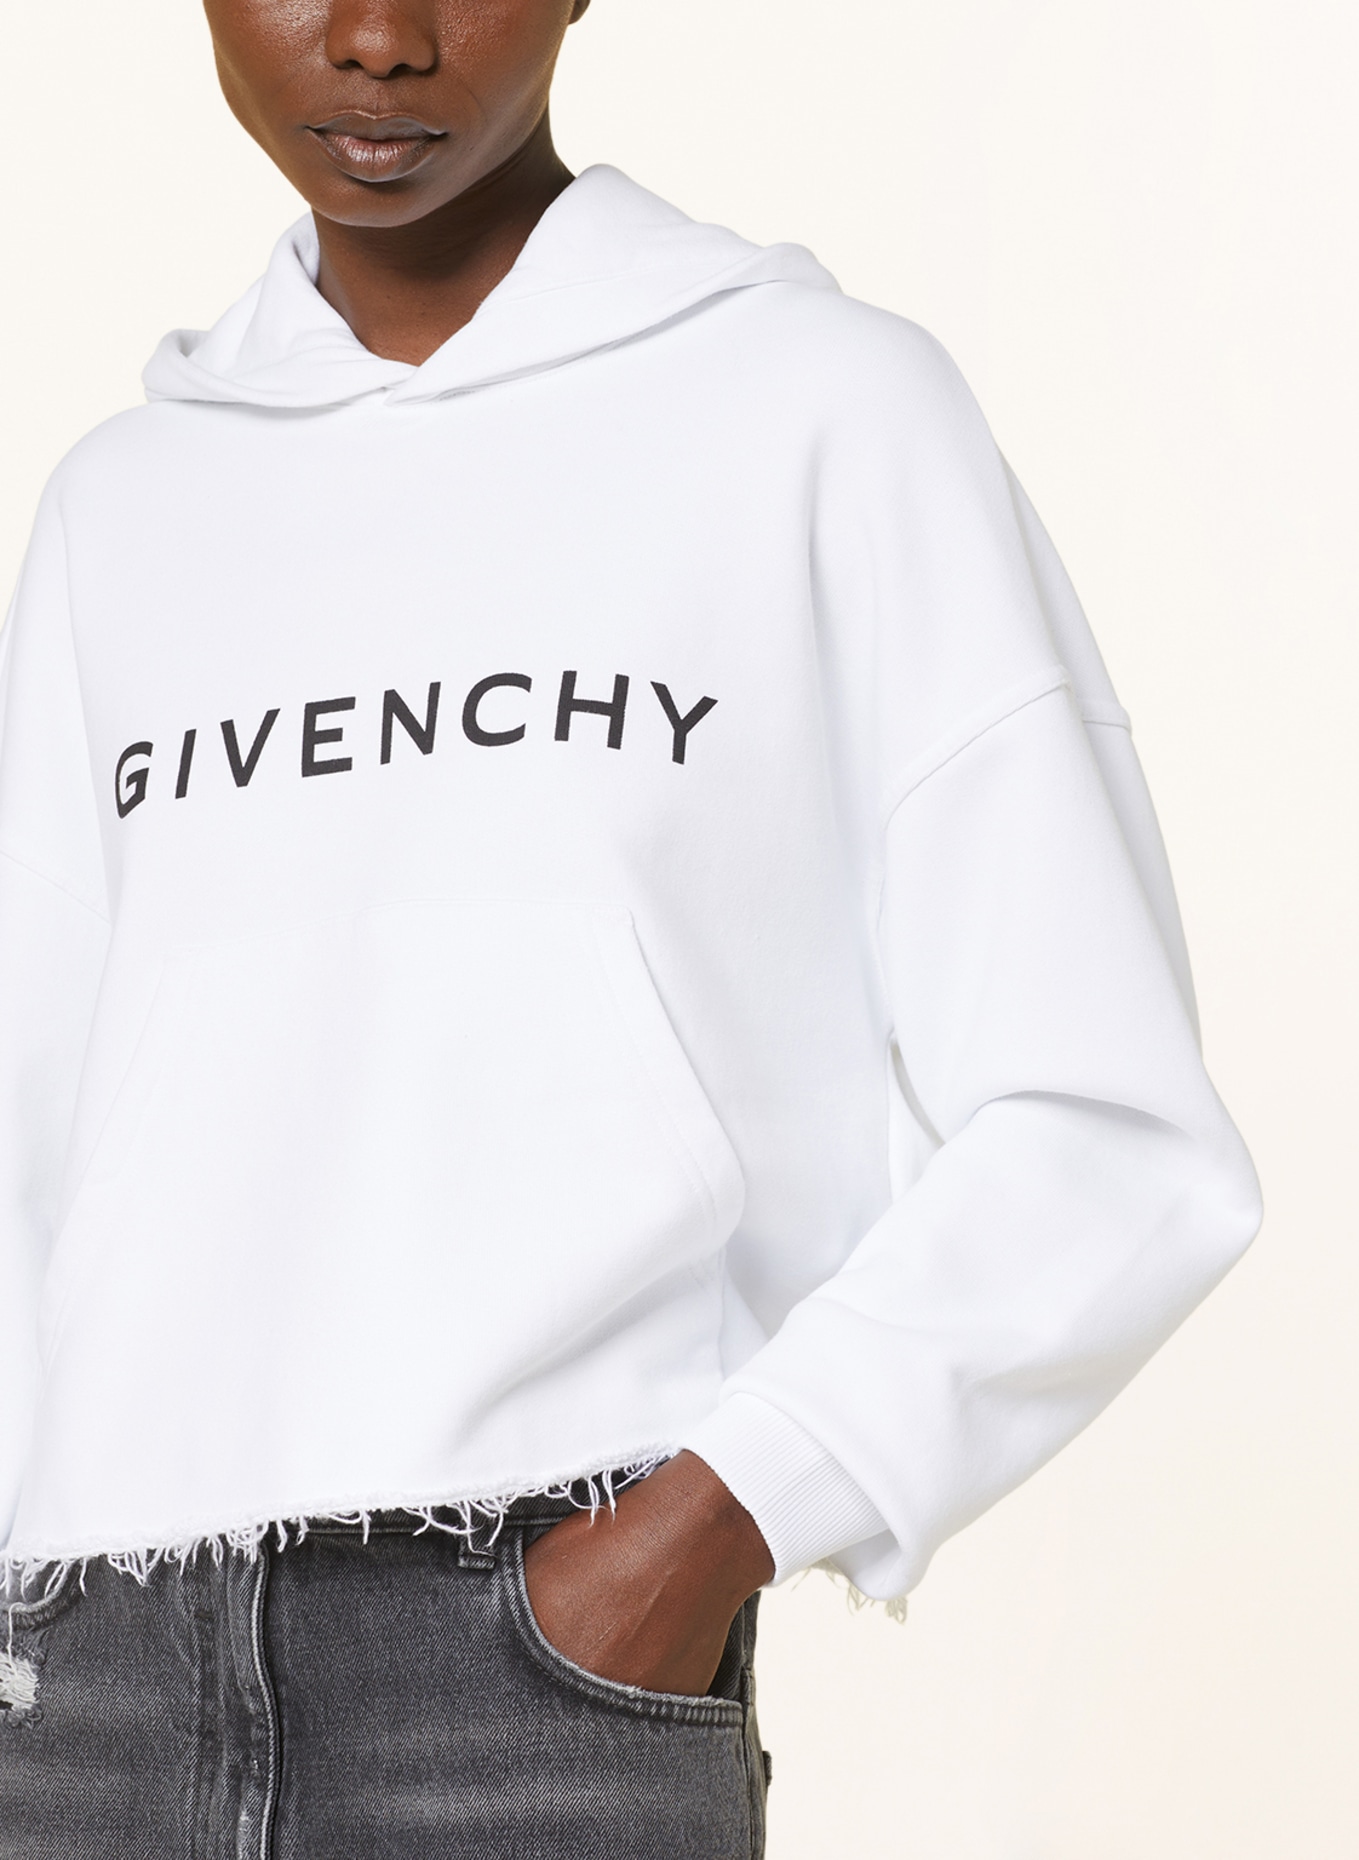 Black Cropped Hoodie by Givenchy on Sale